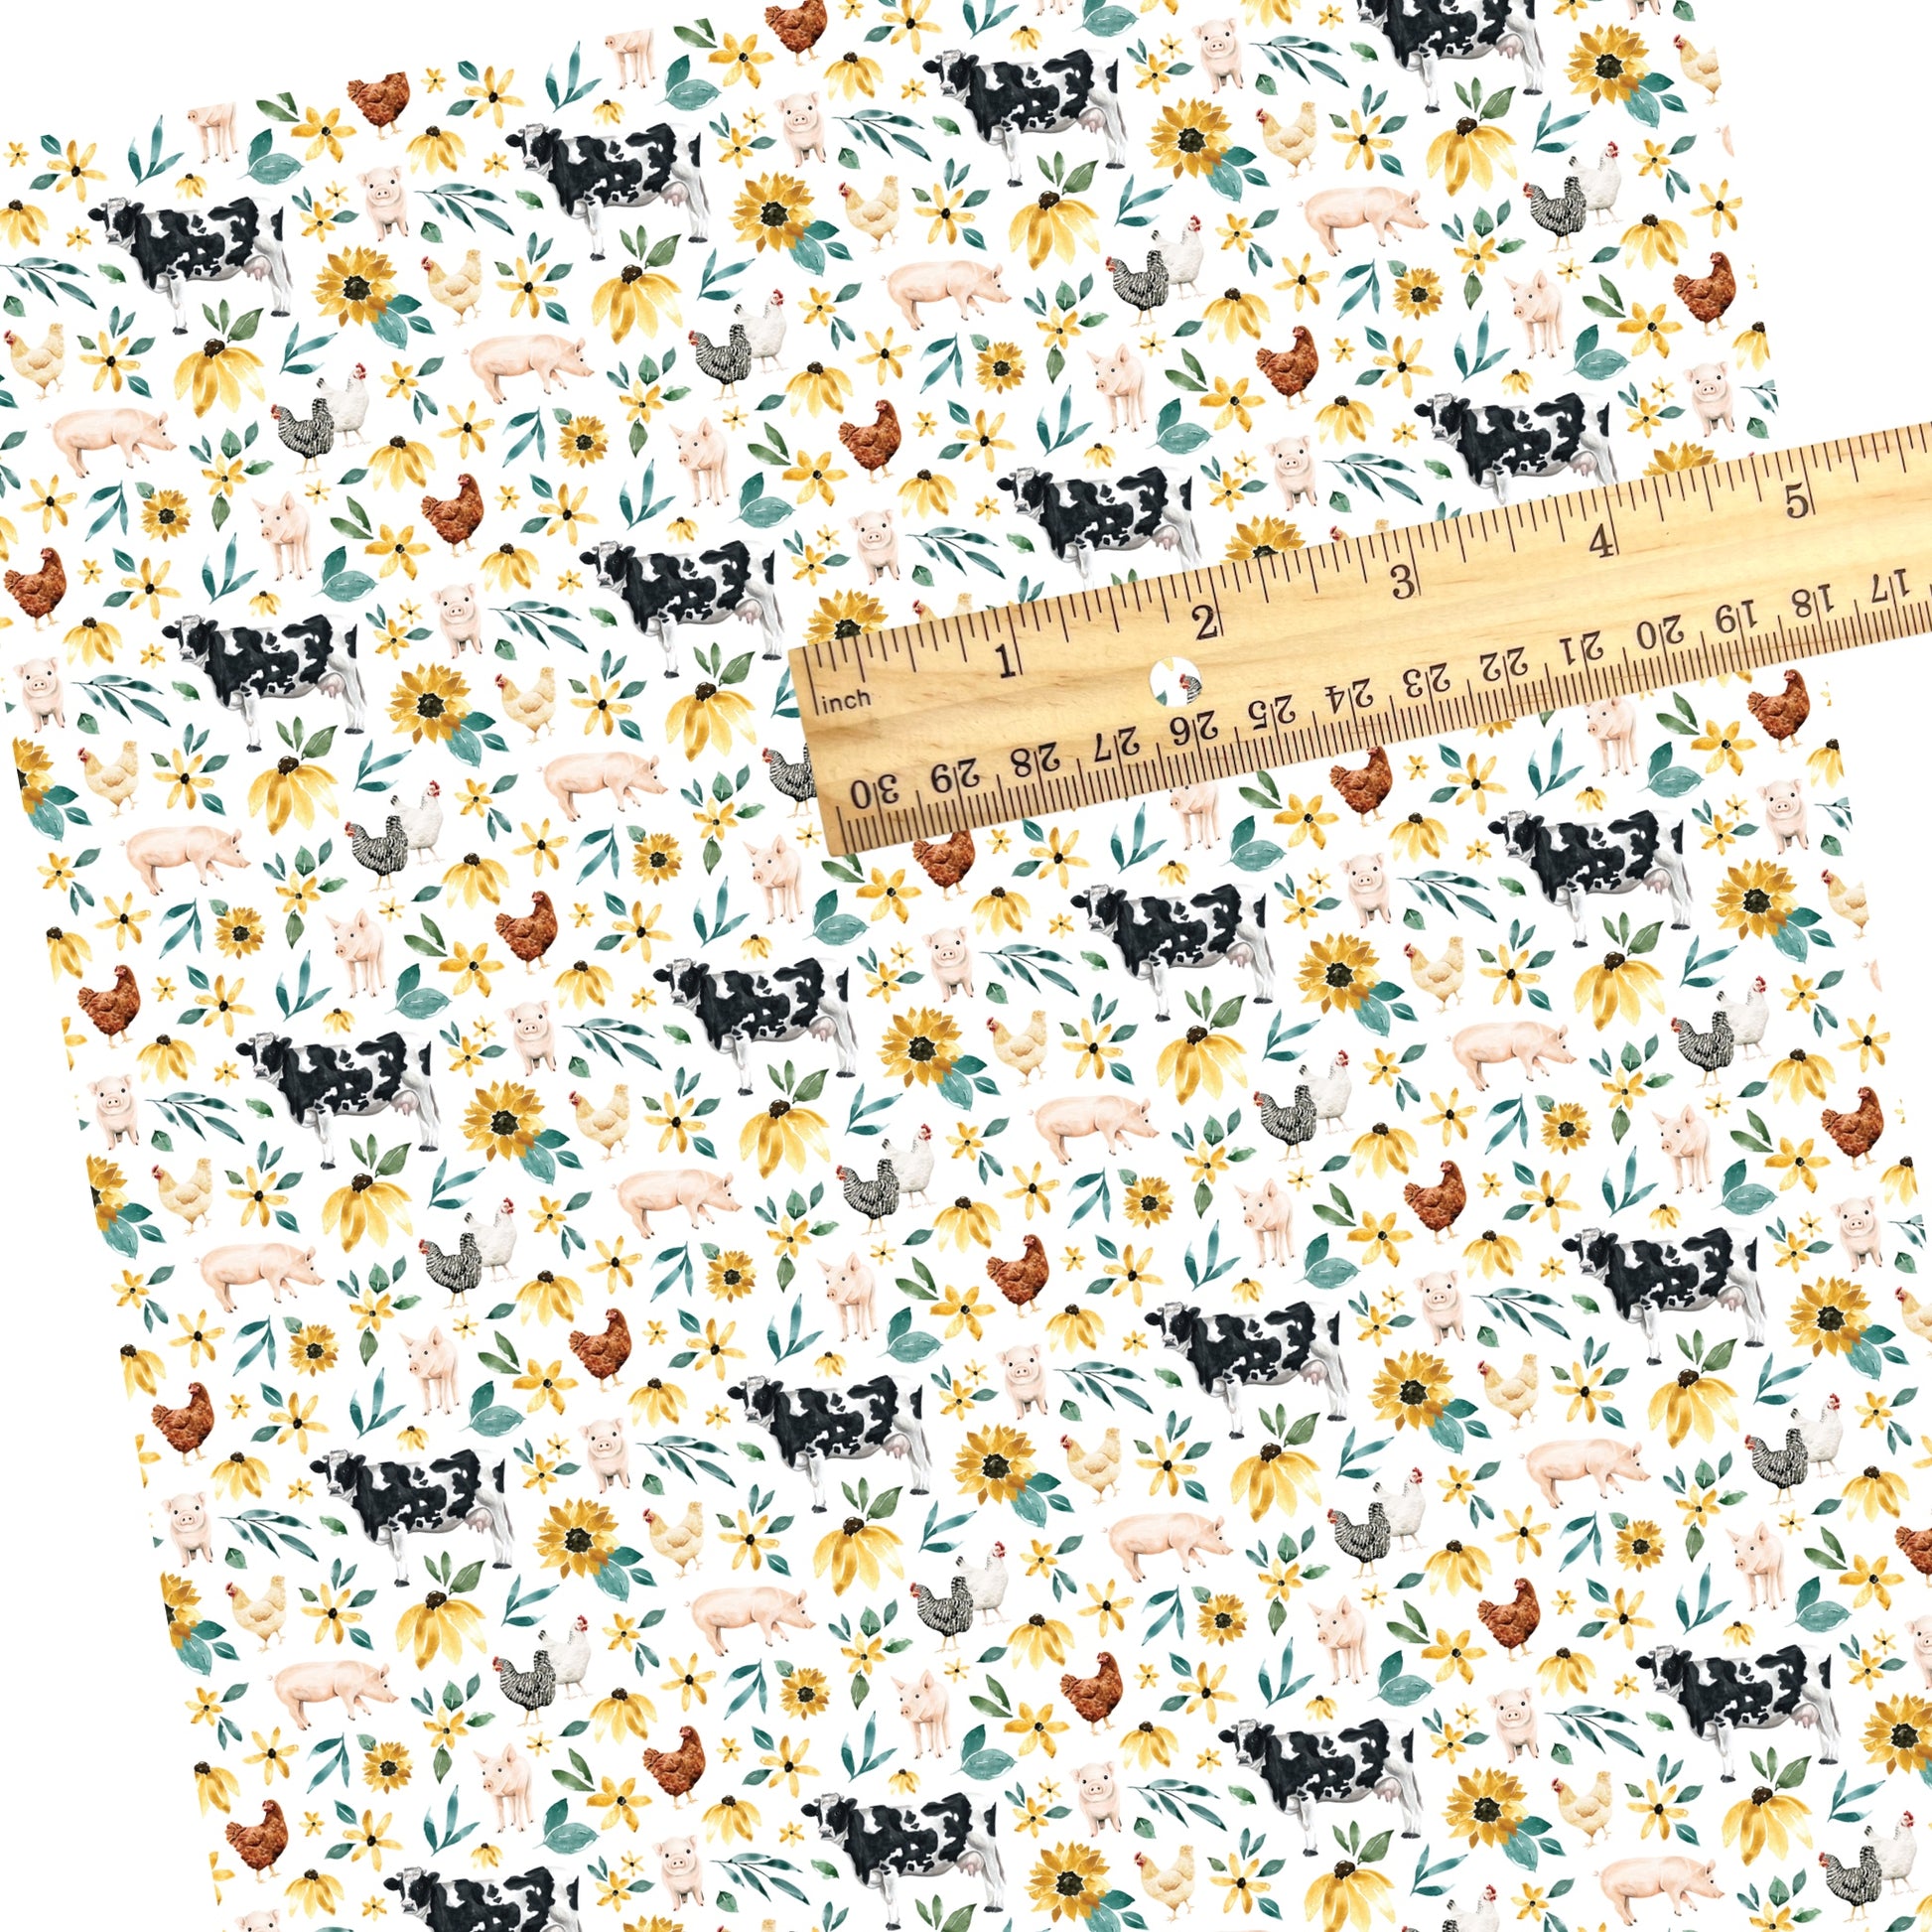 Foral pattern with farm animals faux leather sheet.